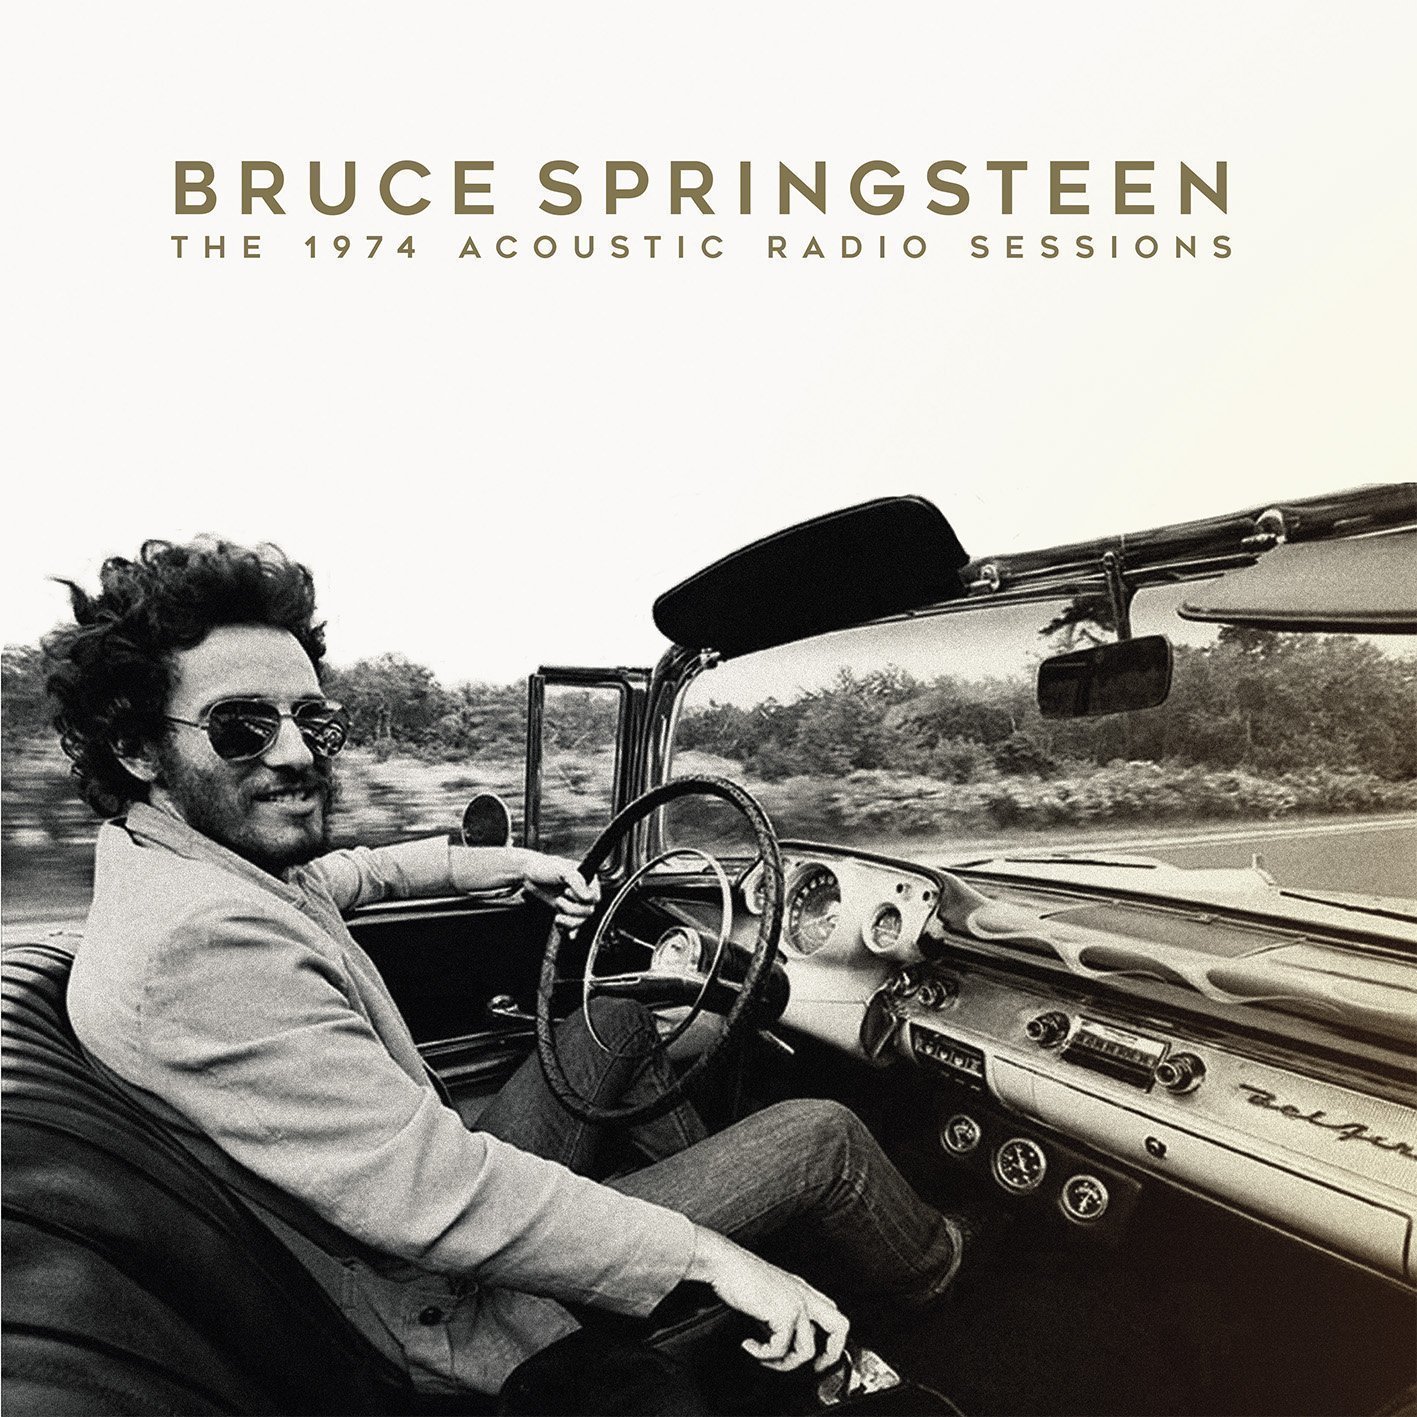 Vinyl Record Bruce Springsteen - The 1974 Acoustic Radio Sessions (2 LP)